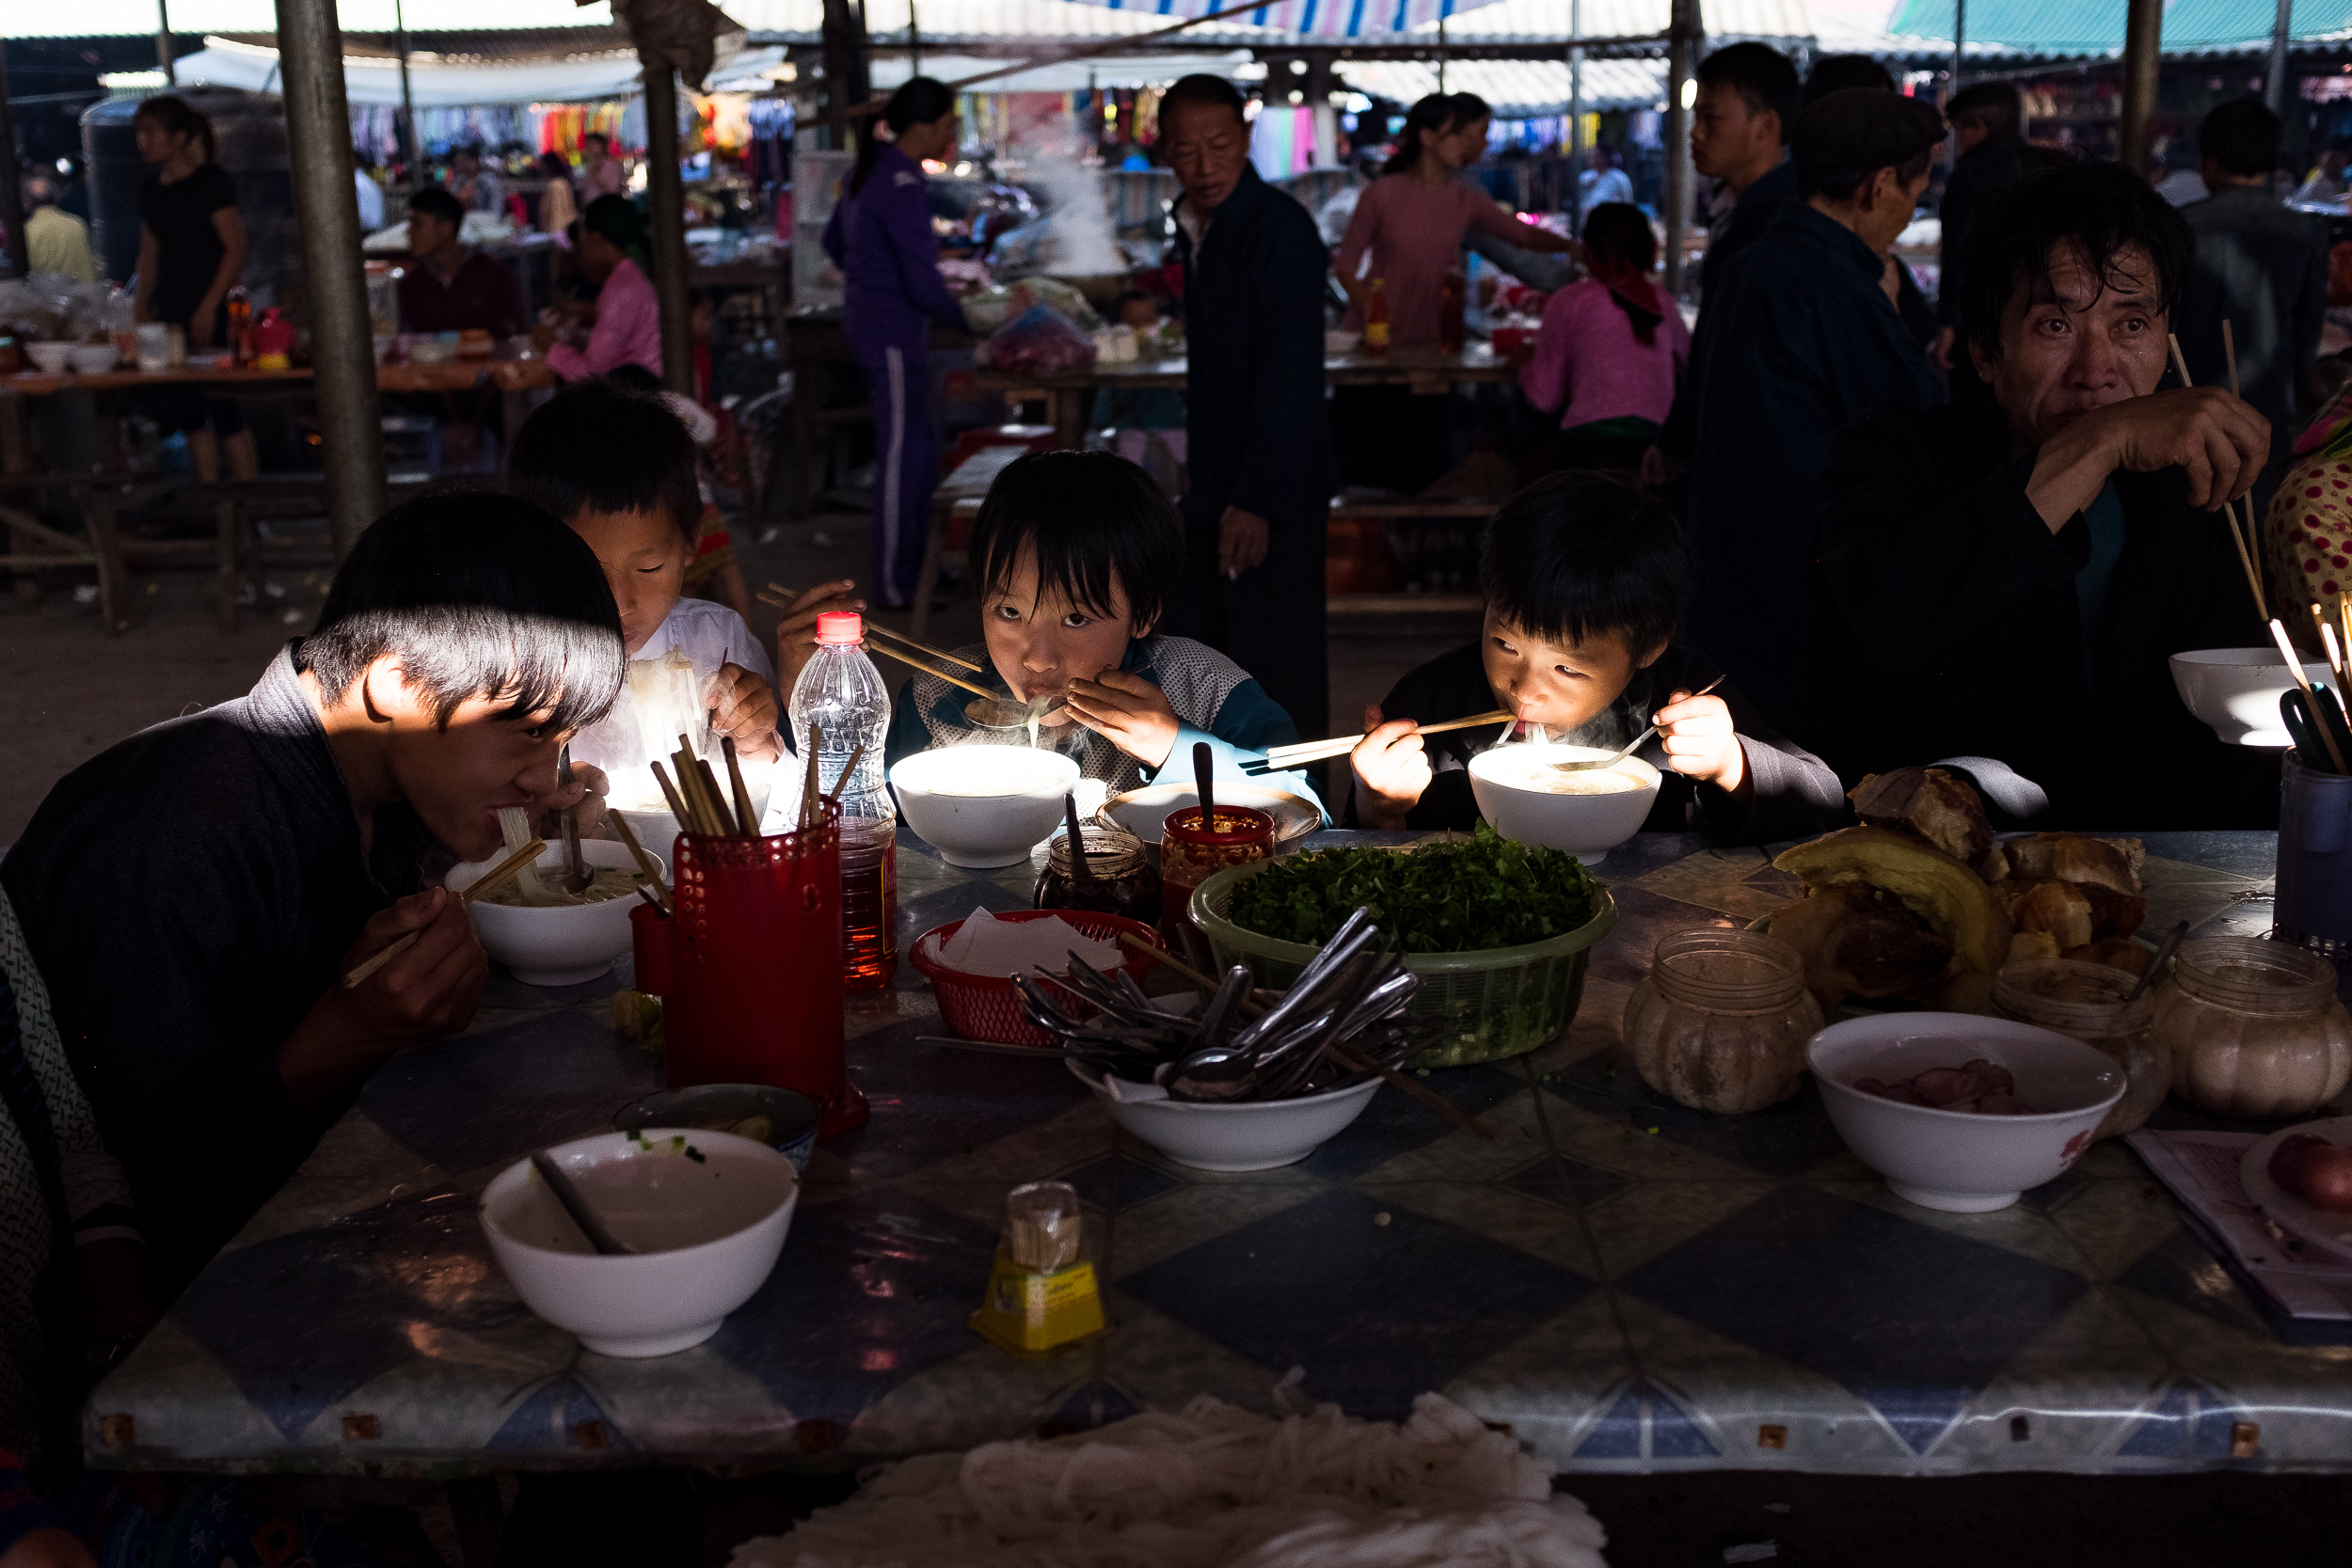  Group of young boys having pho noodles in Dong van market. 